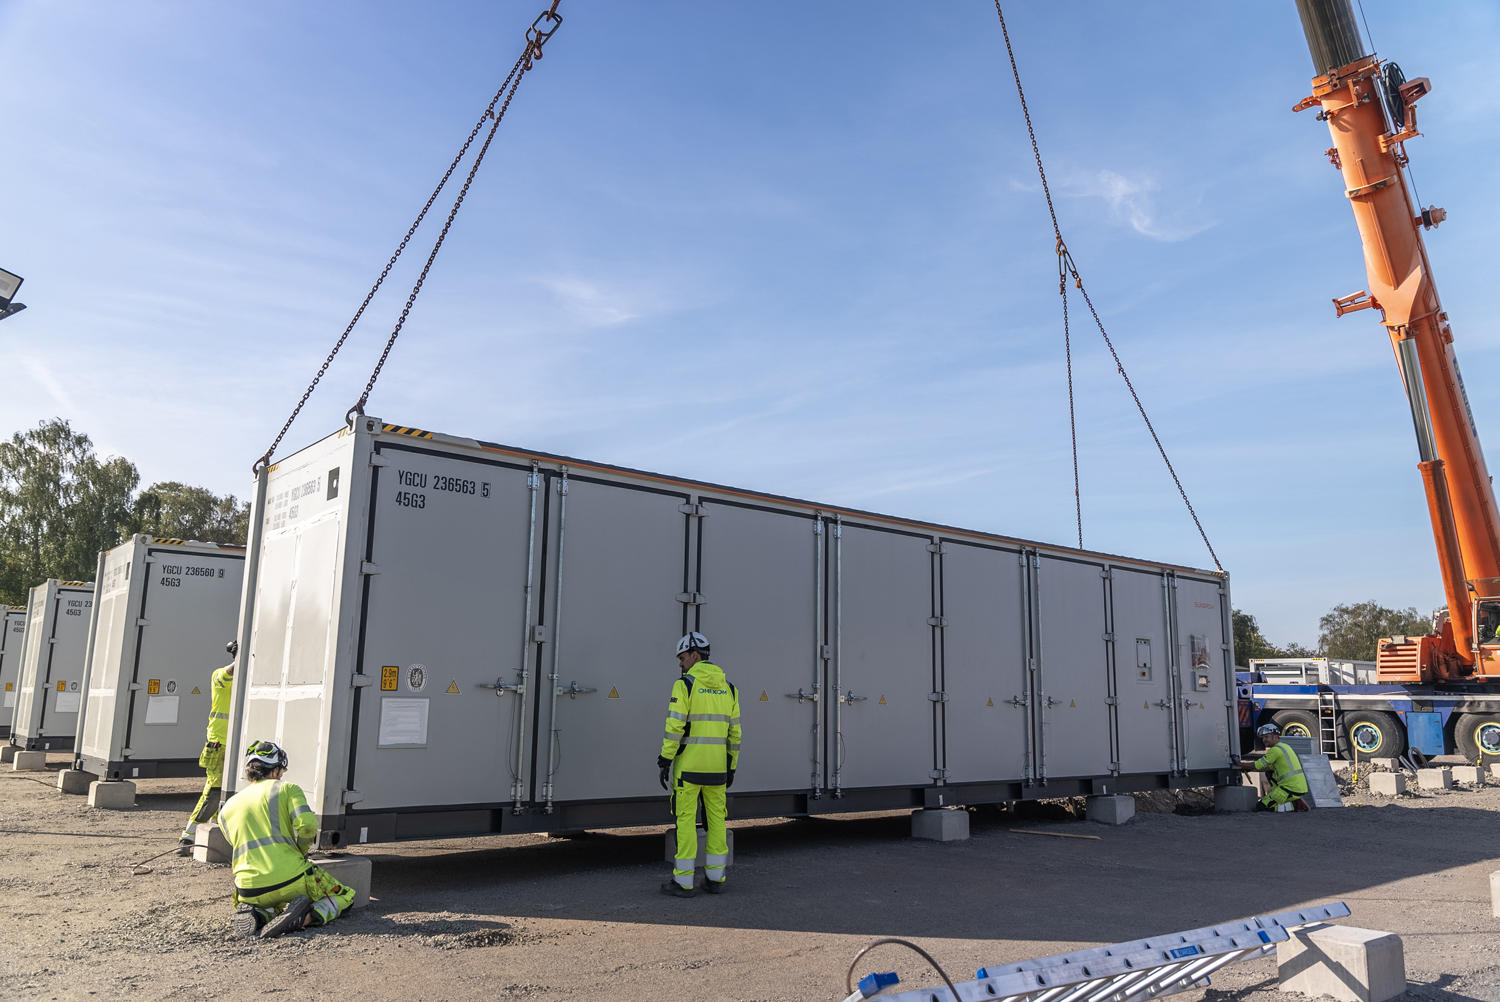 The lithium-ion based battery storage will begin operations in 2024. Axpo is continuing to expand its battery capacities. The 20MW/20MWh will be connected to the grid in Landskrona, Sweden, by the local energy company Landskrona Energie. The battery storage containers were delivered in autumn 2023. The new battery storage system will be used in the Landskrona region to provide balancing energy for grid balance.